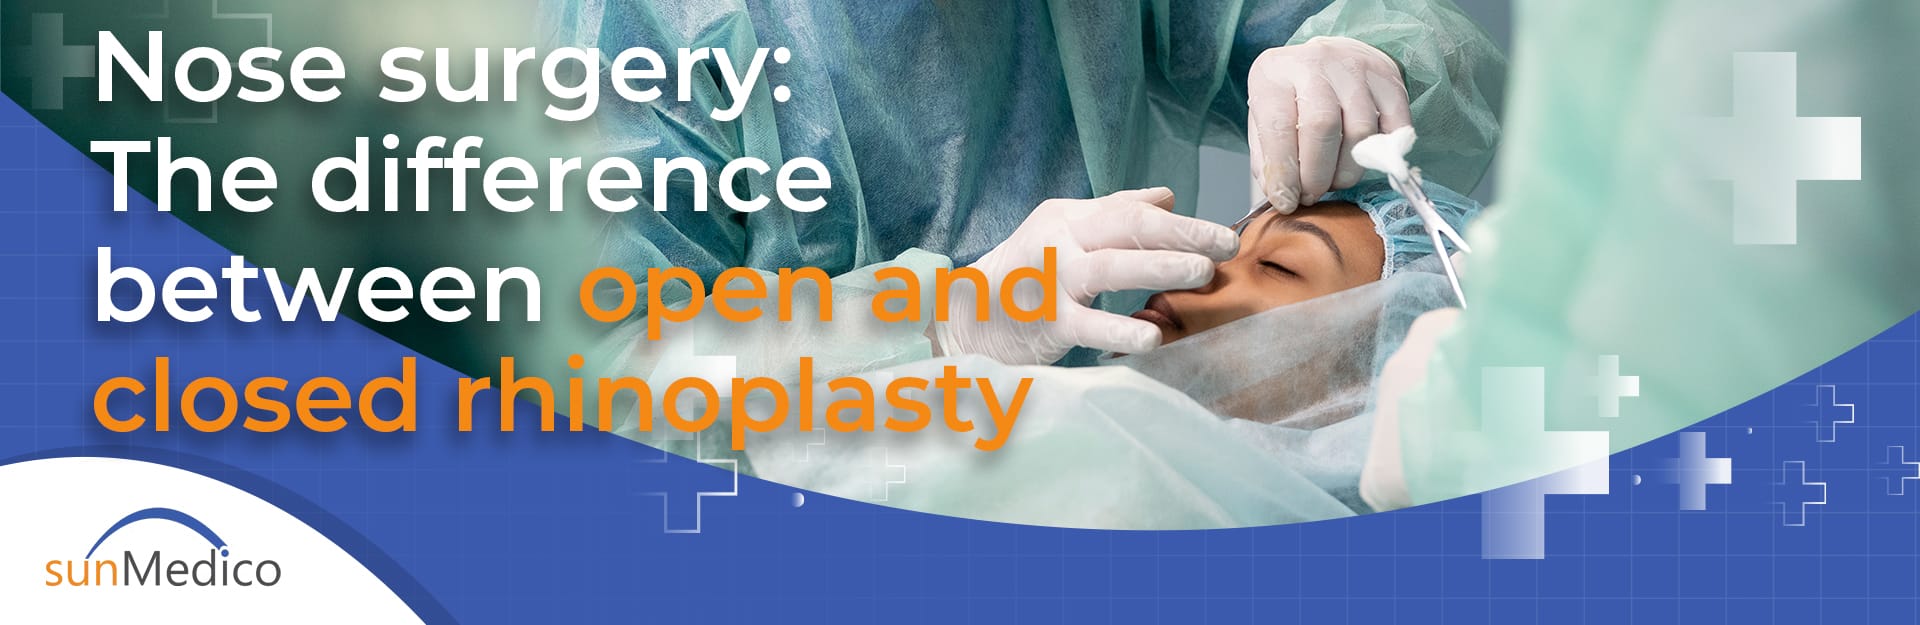 Nose surgery: The difference between open and closed rhinoplasty